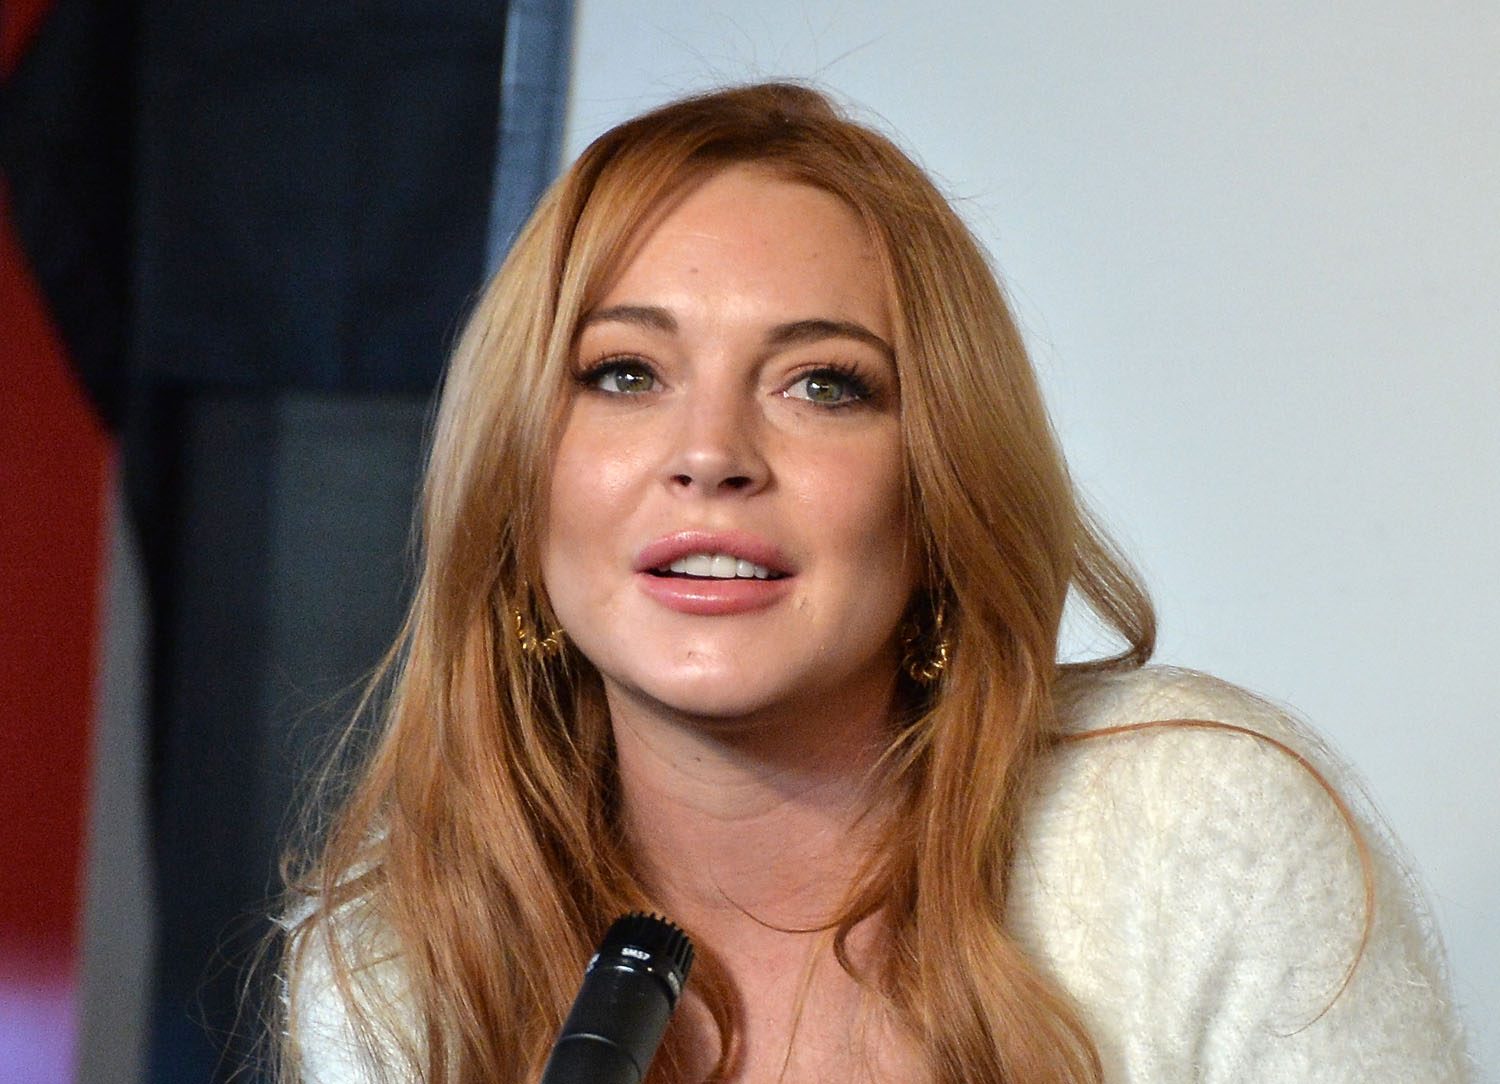 Actress Lindsay Lohan speaks at a press conference on Jan. 20, 2014 in Park City, Utah. (George Pimentel—Getty Images)